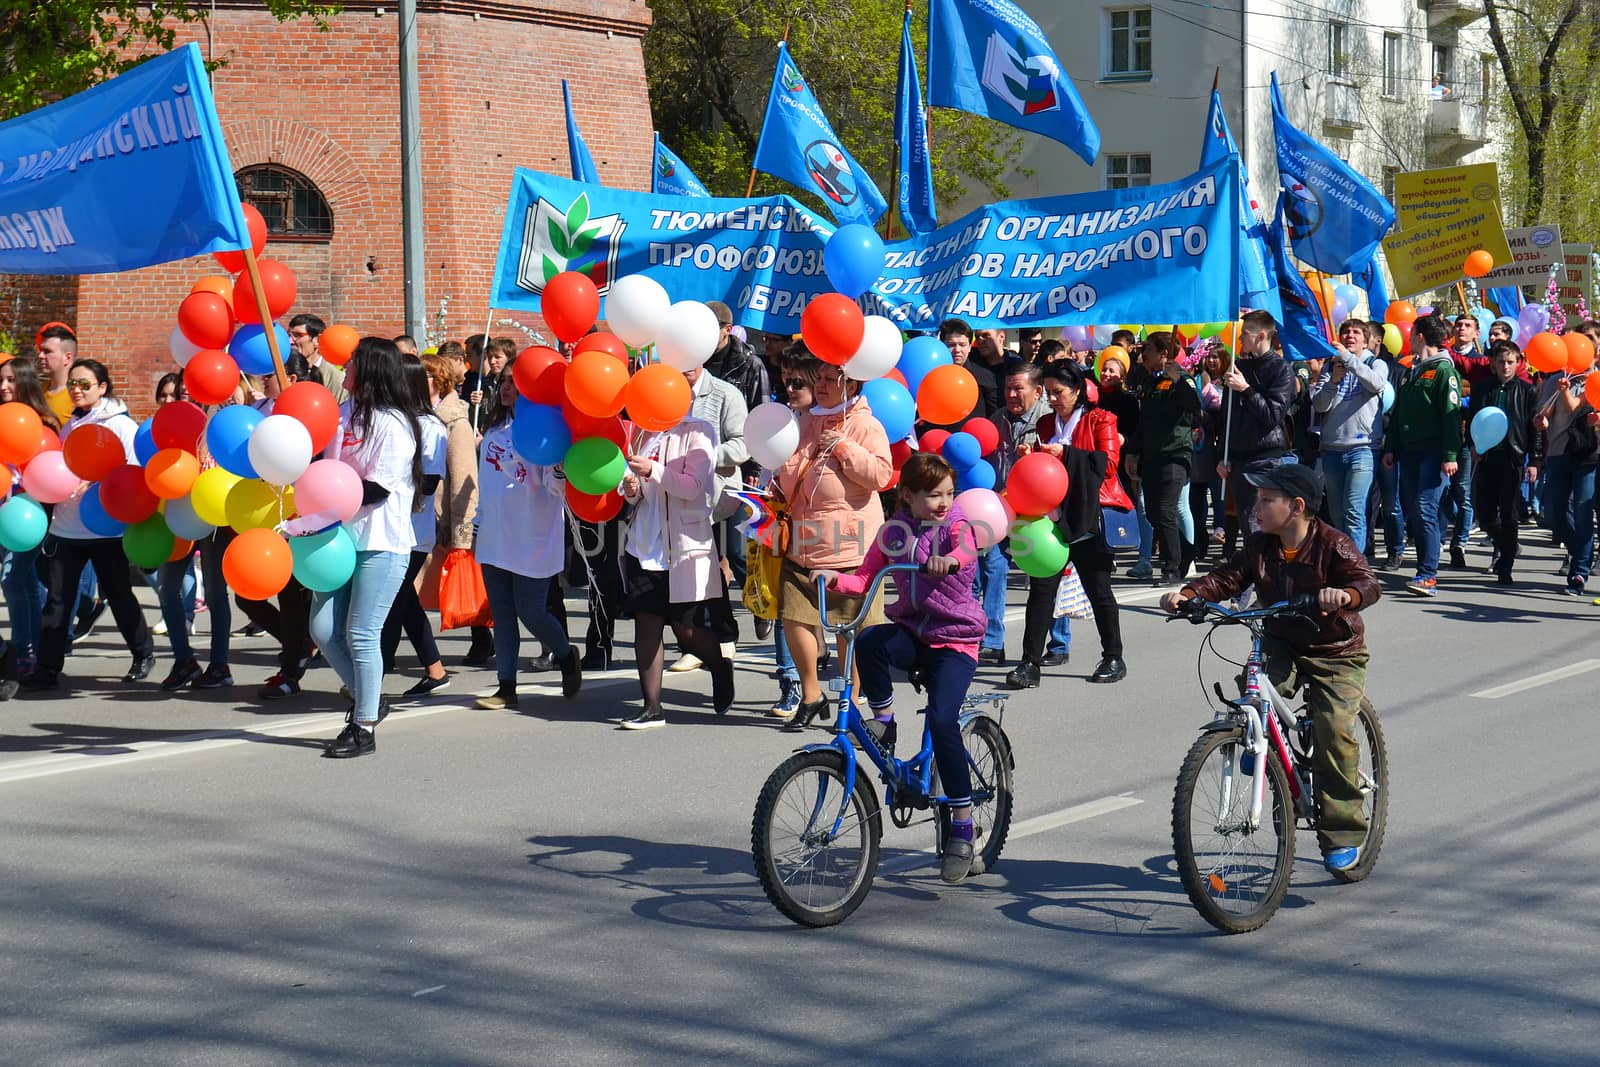 The demonstration devoted to celebration on May 1. Tyumen, Russia, 2016